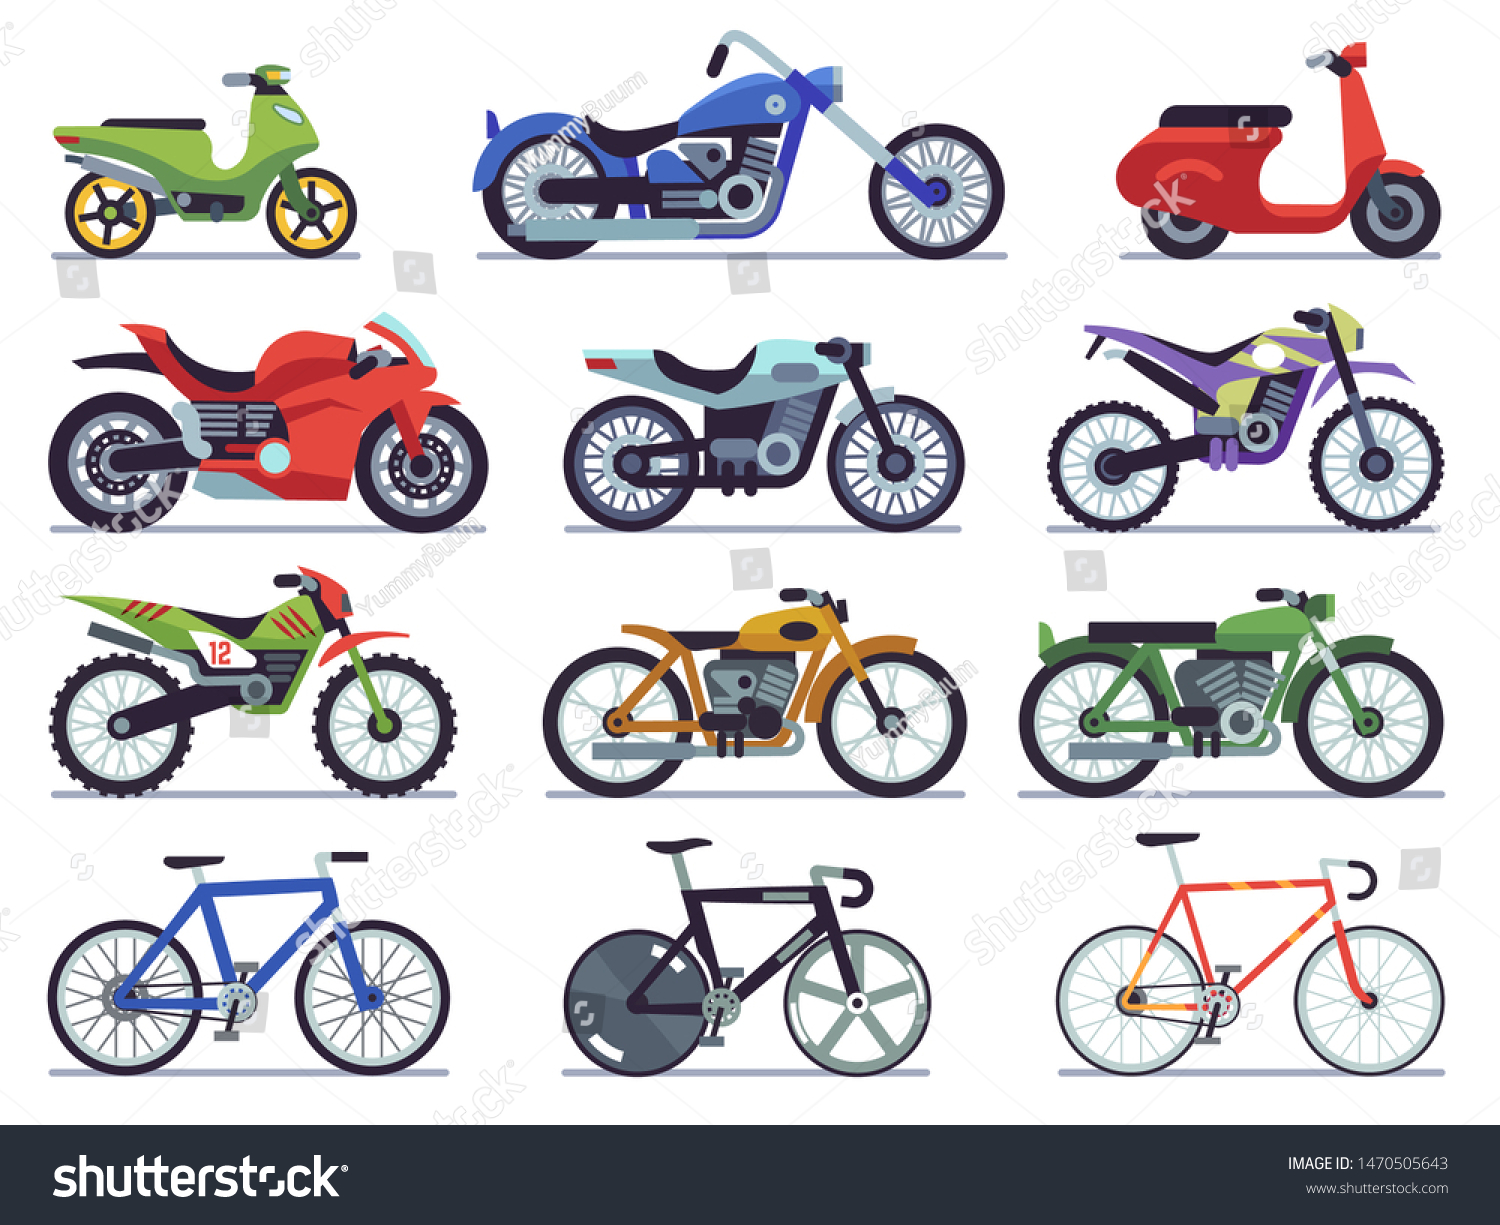 Stock Vector Motorcycle Set Motorbike And Scooter Sport Bike And Chopper Motocross Race And Delivery Vehicles 1470505643 